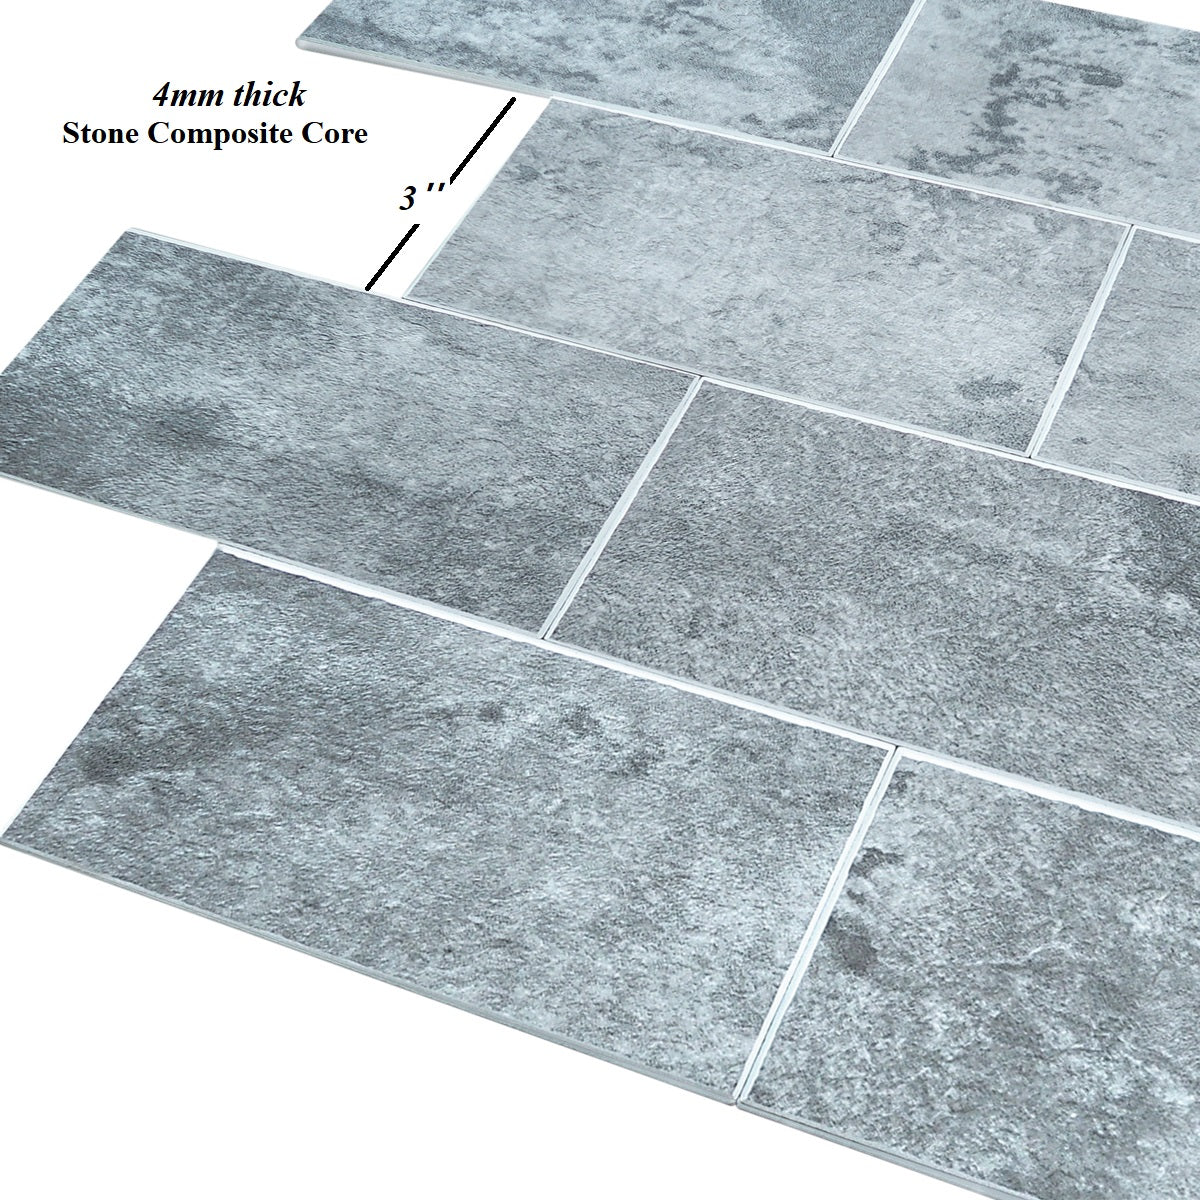 Decopus Brick Tile Peel and Stick Backsplash ( 15x12x 0.16in Thick 5pc/Pack) Faux Stone Tile - Abstract Cement Grey